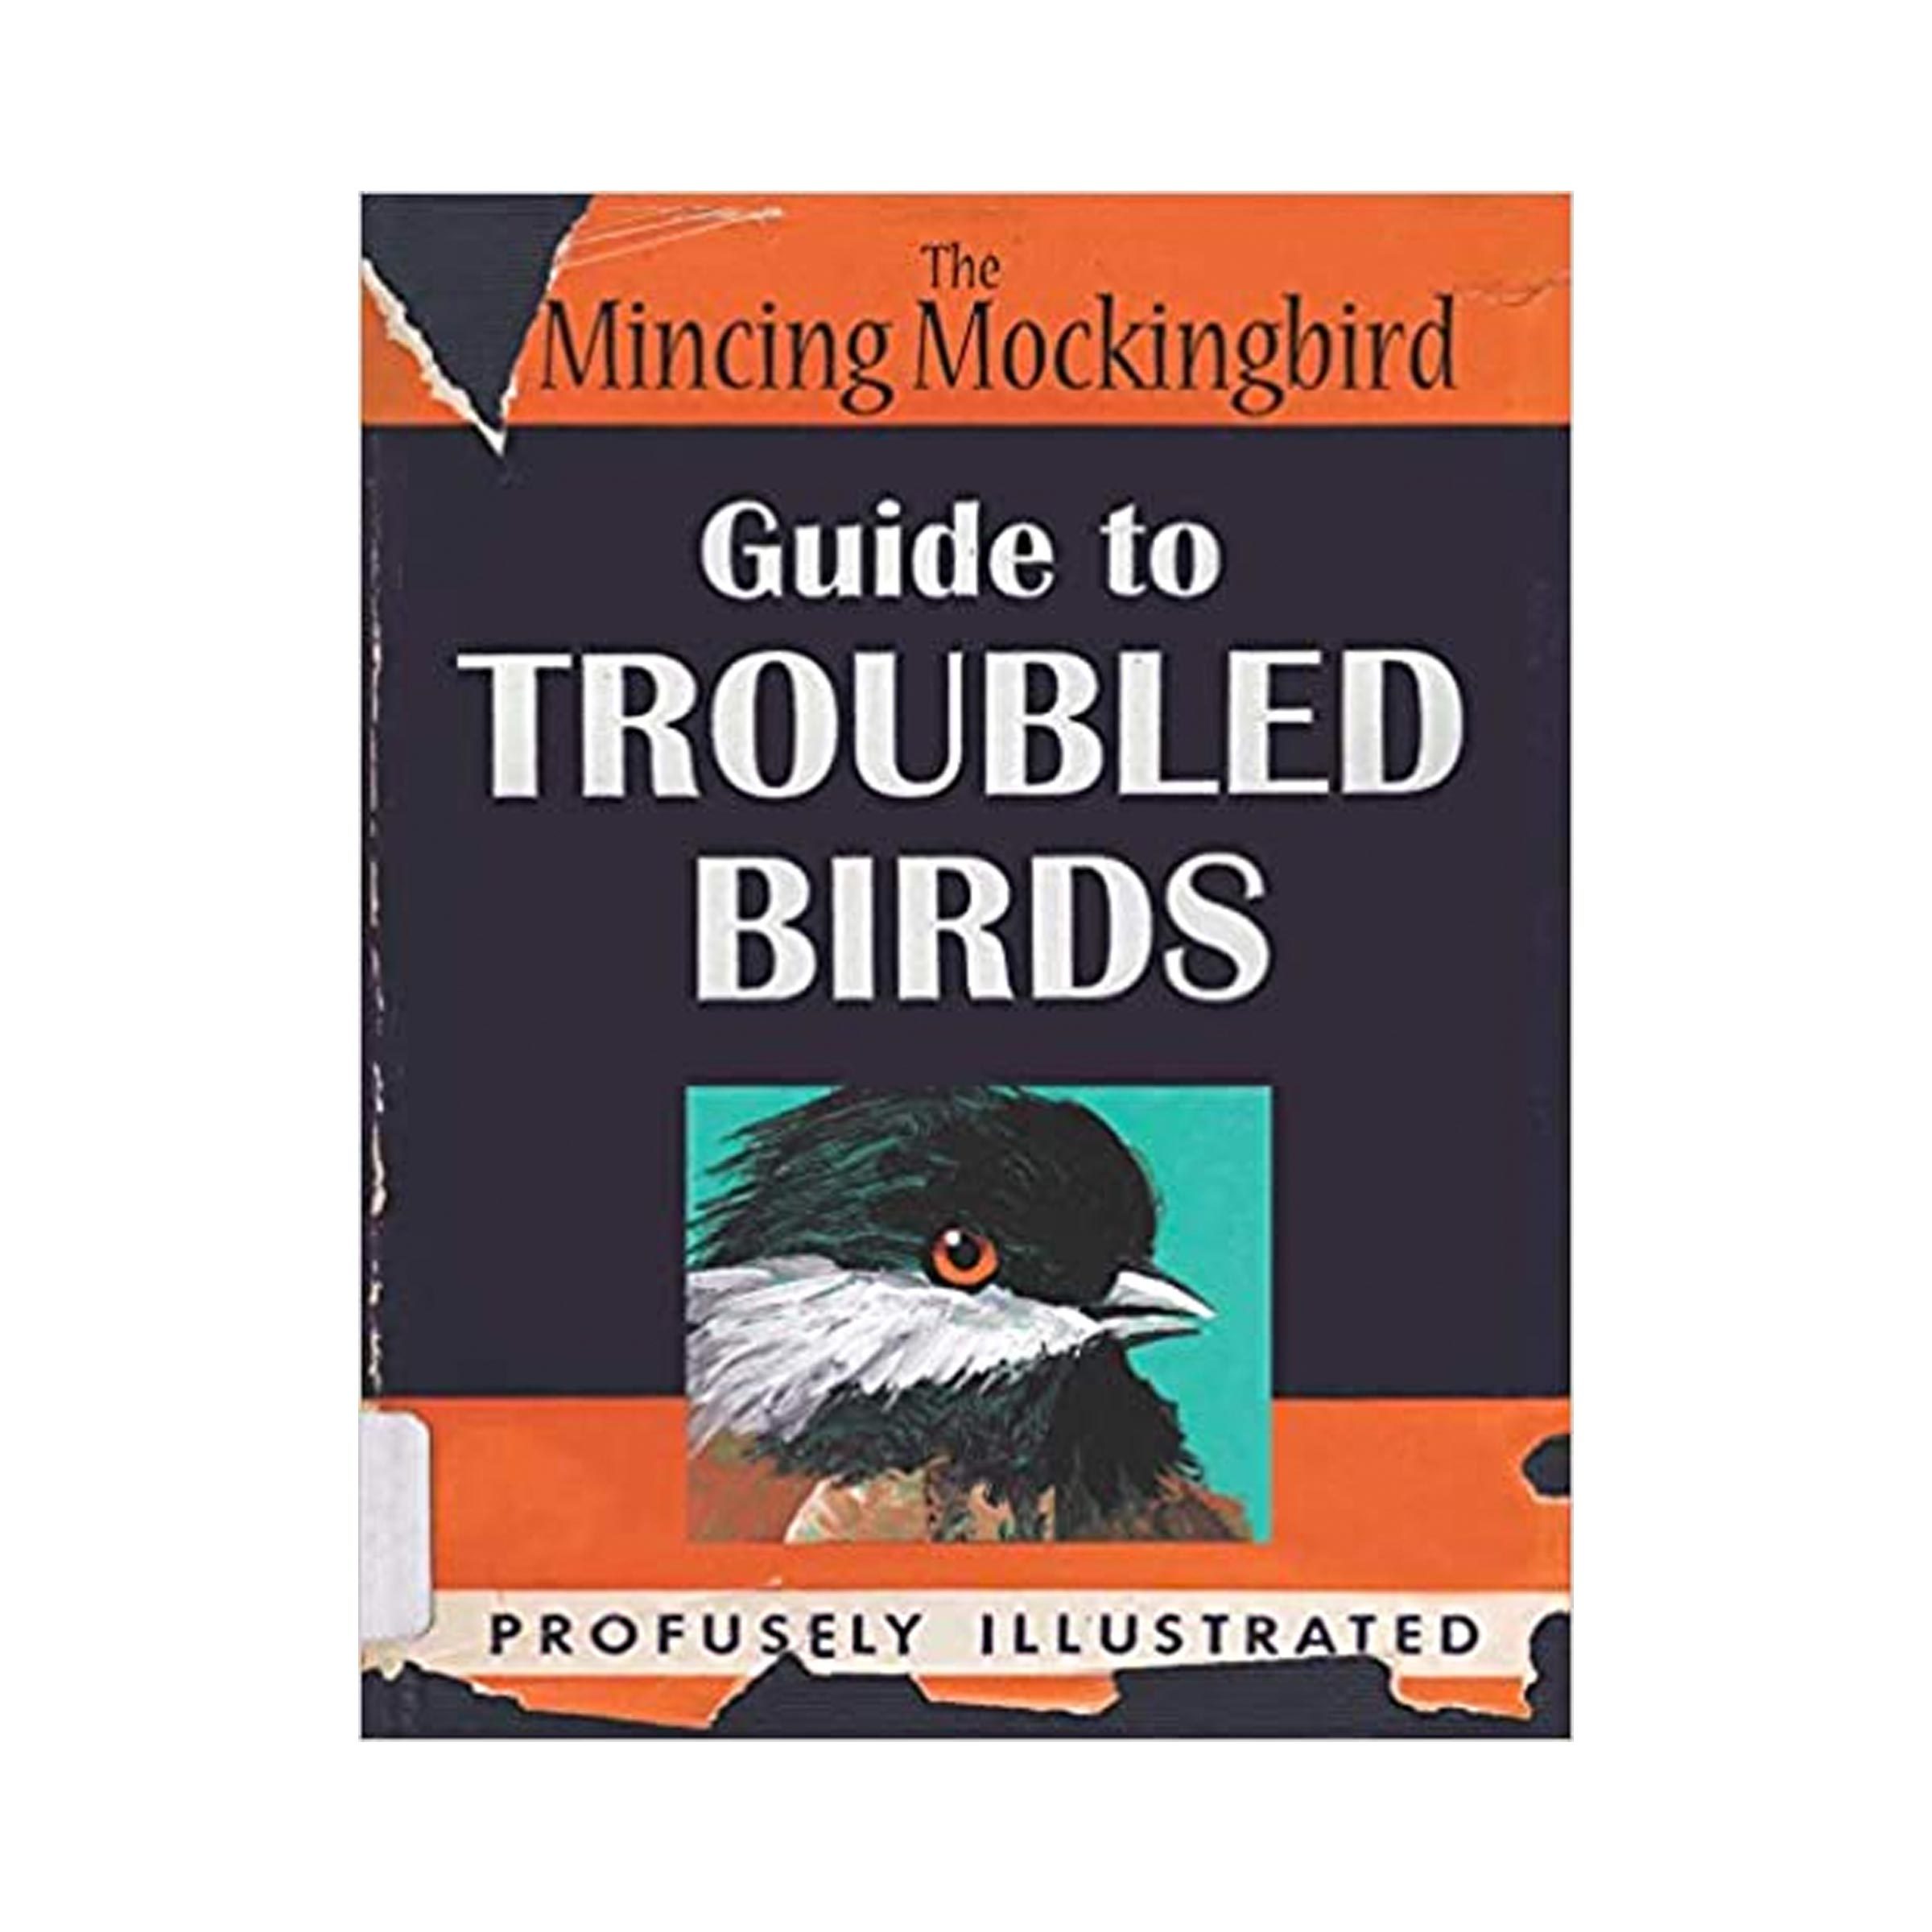 The Mincing Mockingbird: Guide to Troubled Birds